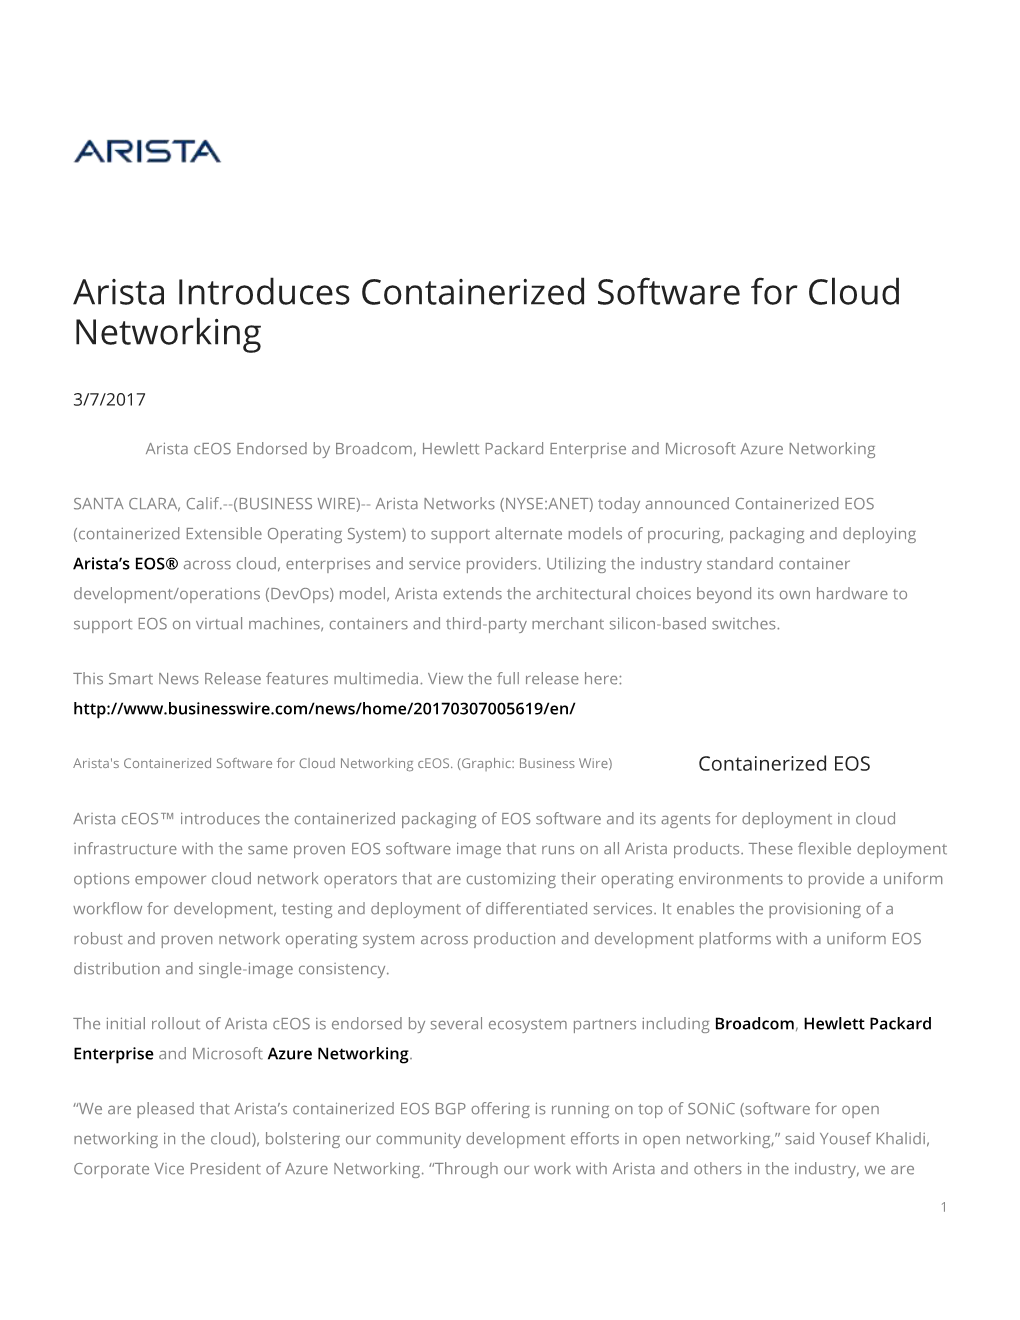 Arista Introduces Containerized Software for Cloud Networking